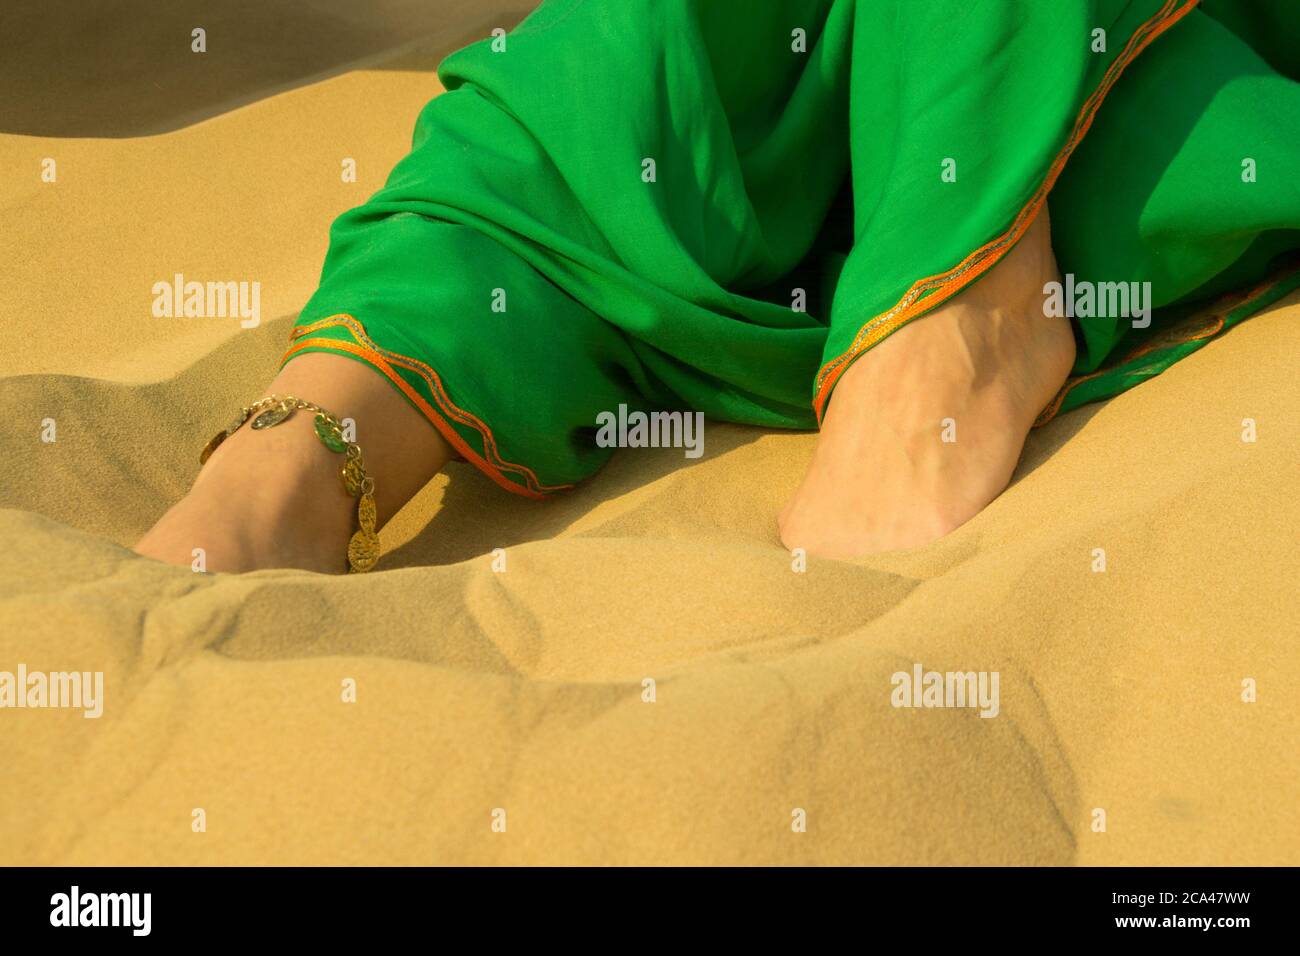 Woman's feet in the desert wearing a green dress and jewellery in her foot Stock Photo